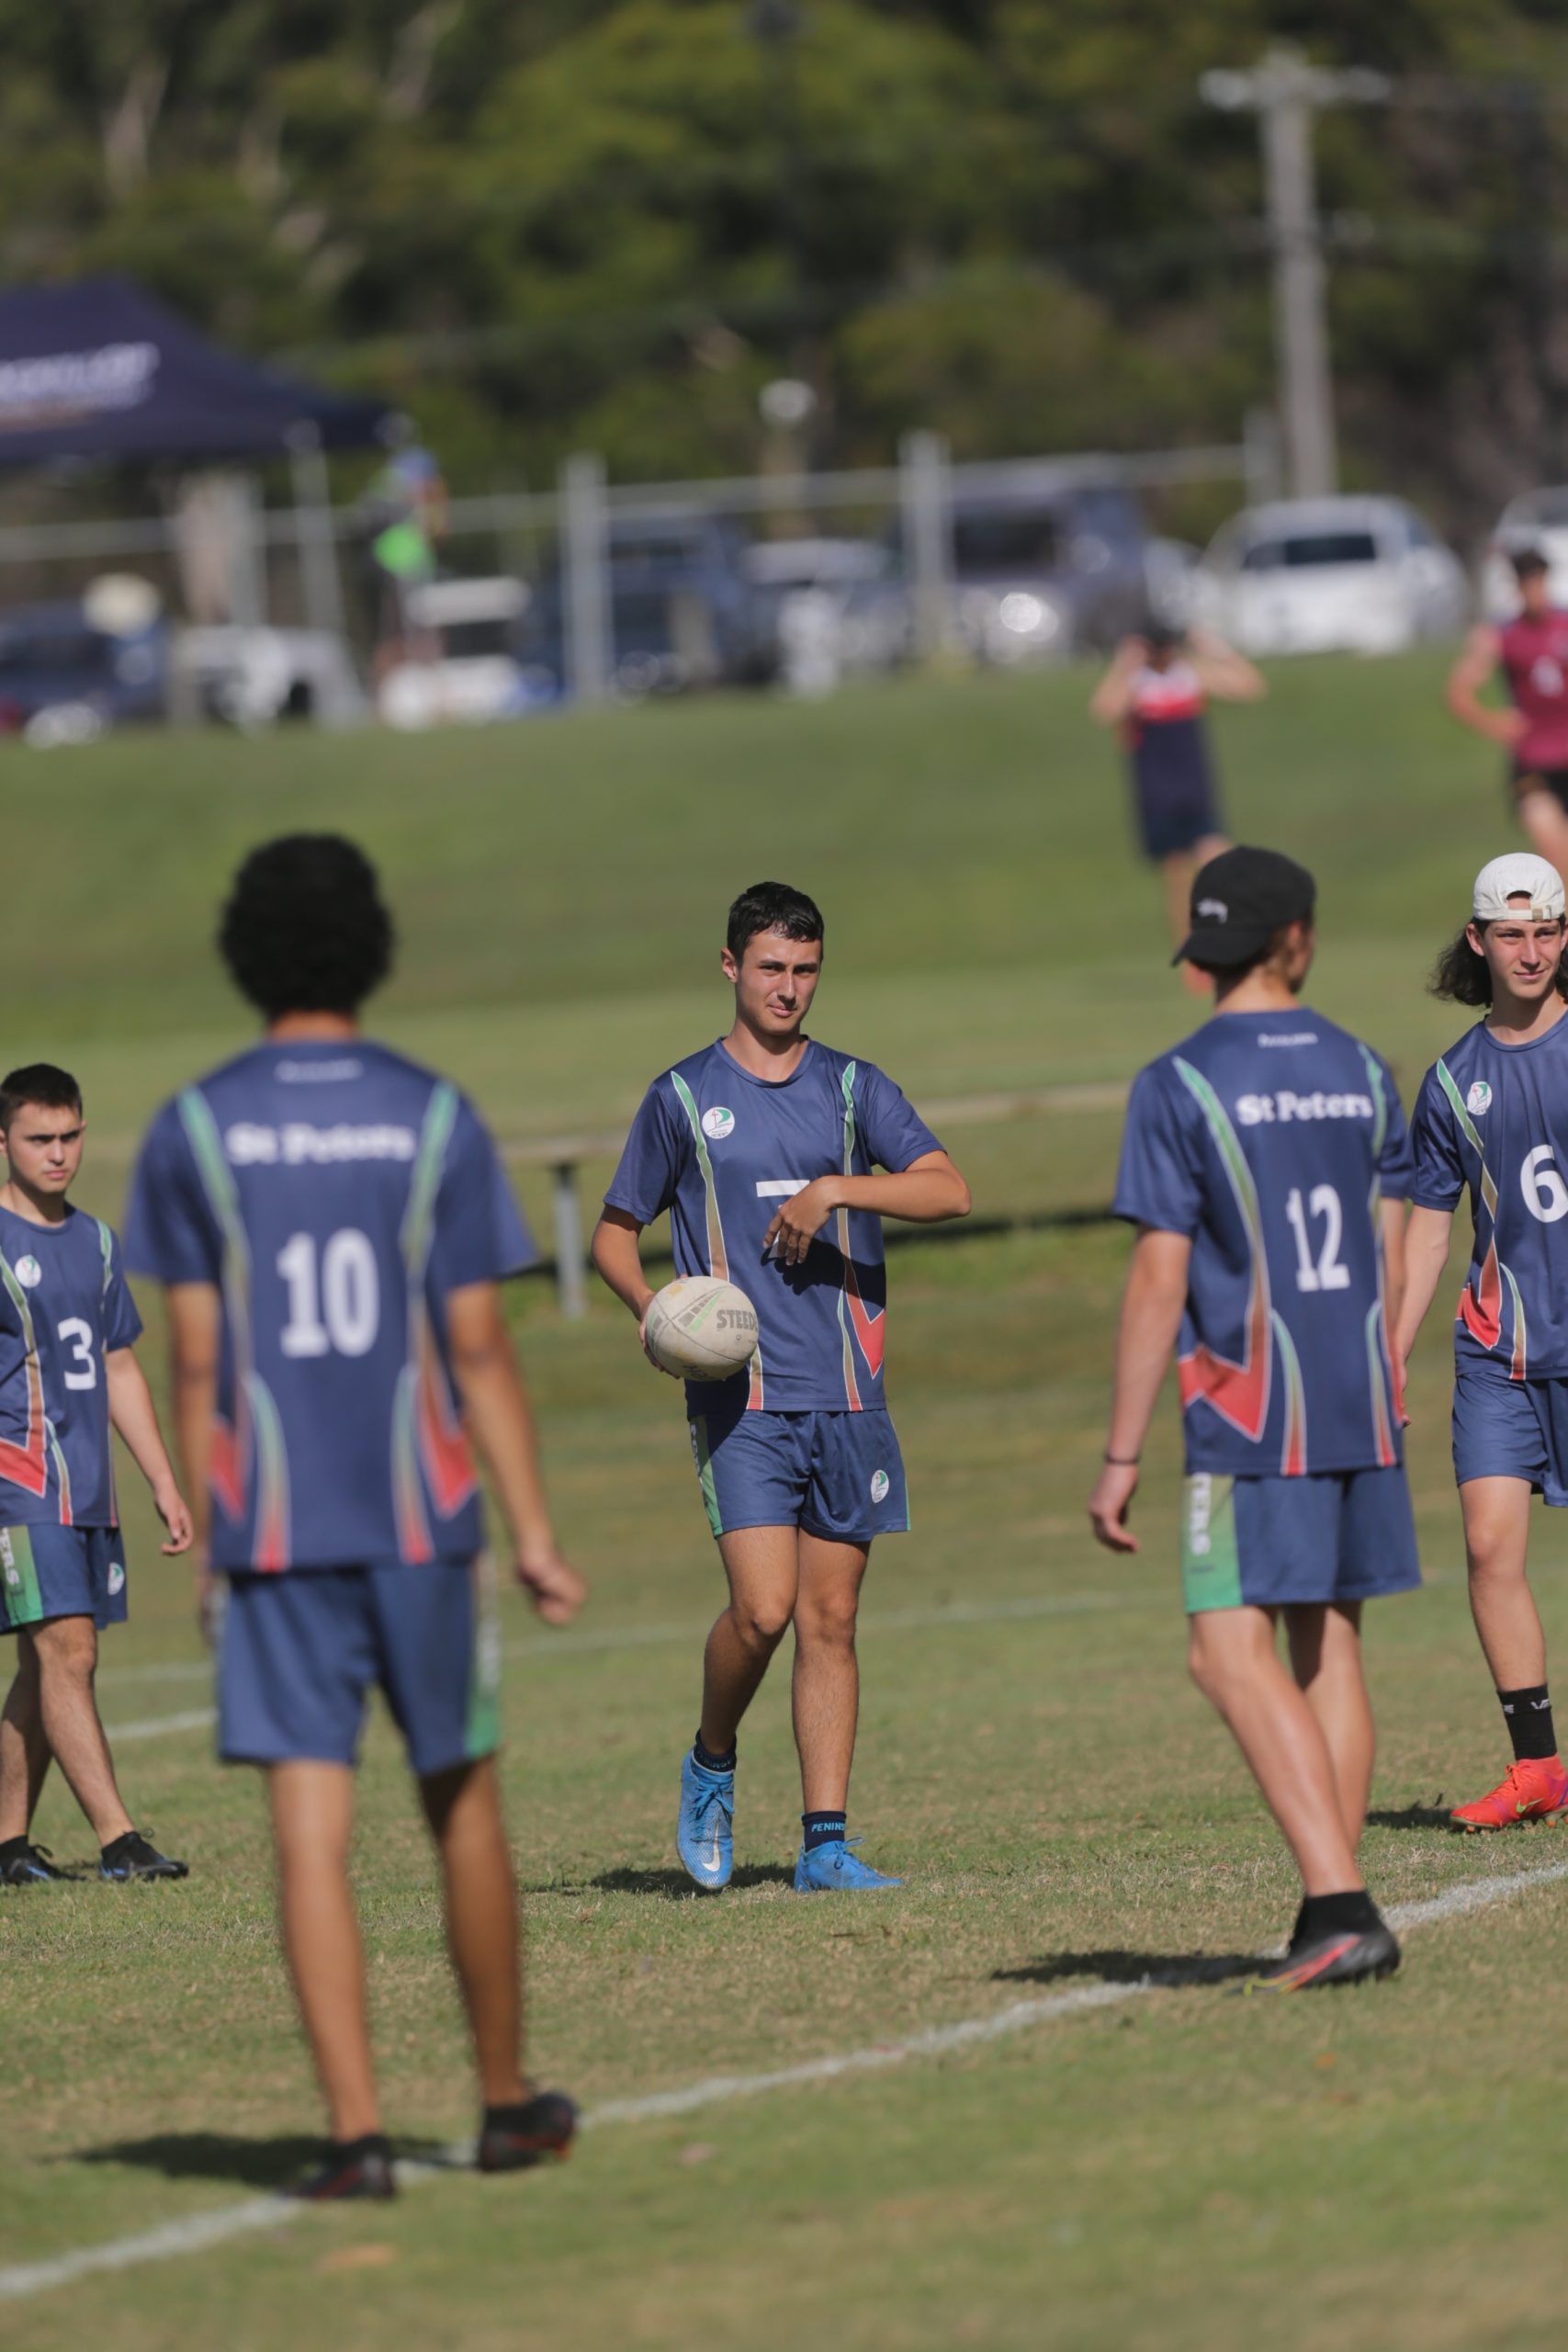 St. Peter’s Opens and Under 15 years Touch Football team